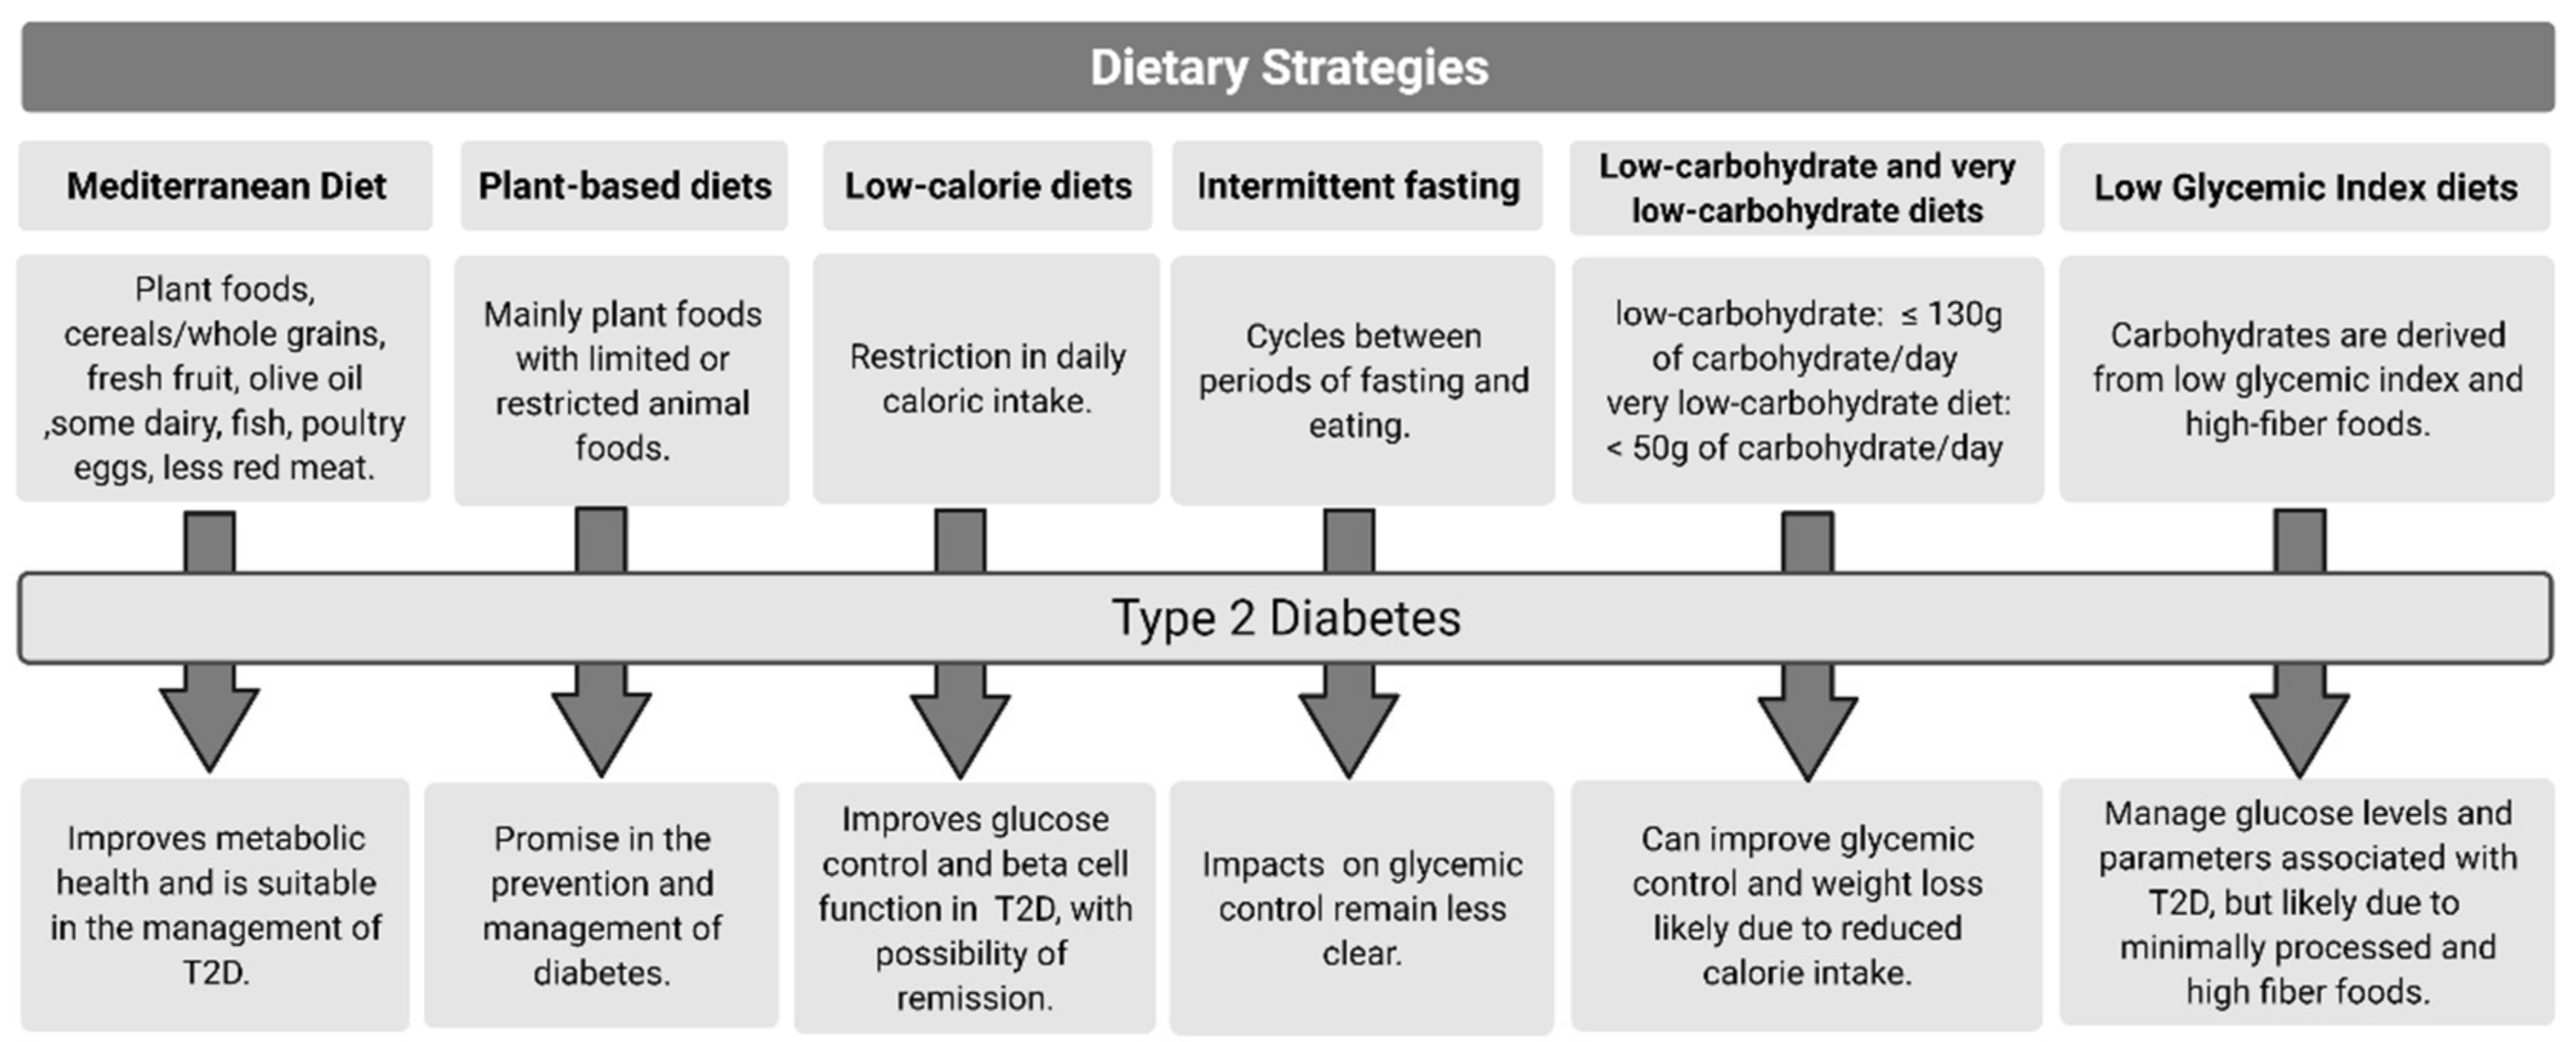 intermittent fasting diabetes remission)